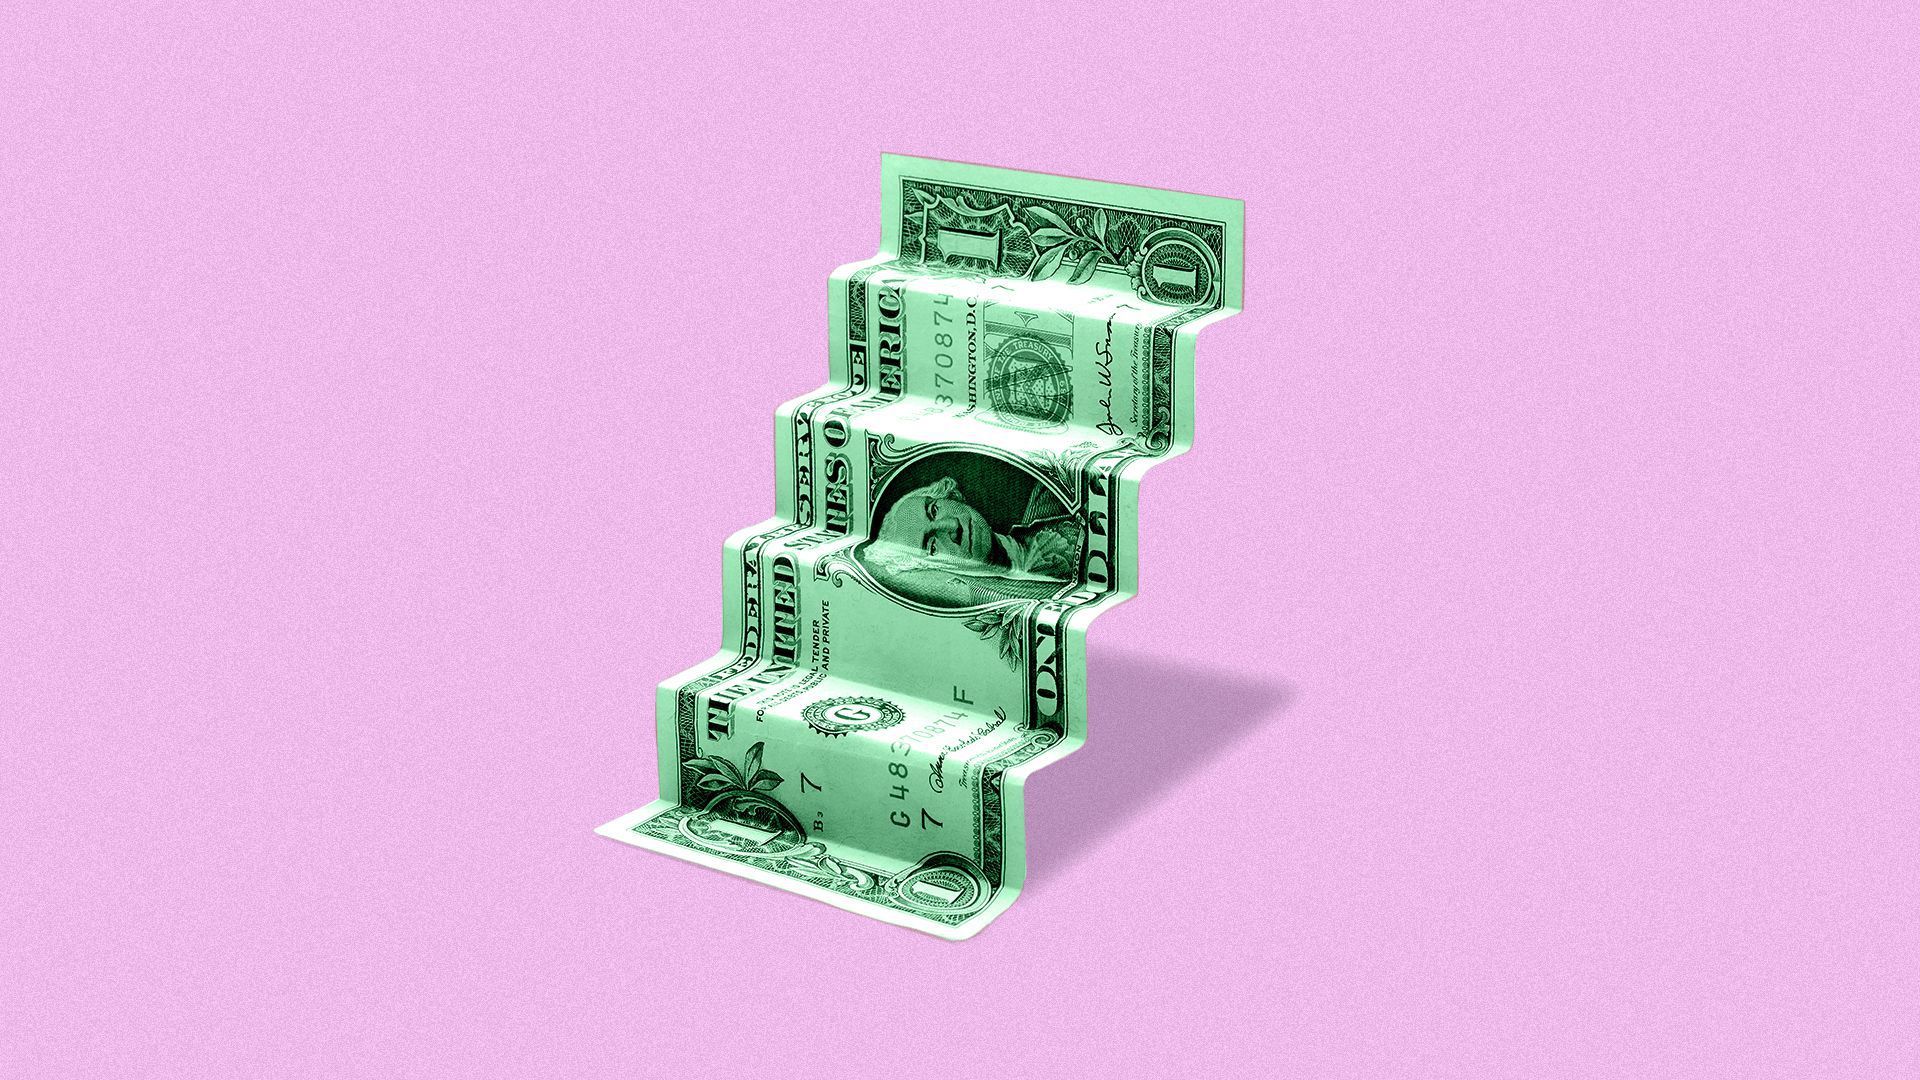 This illustration shows a ladder made of a dollar bill